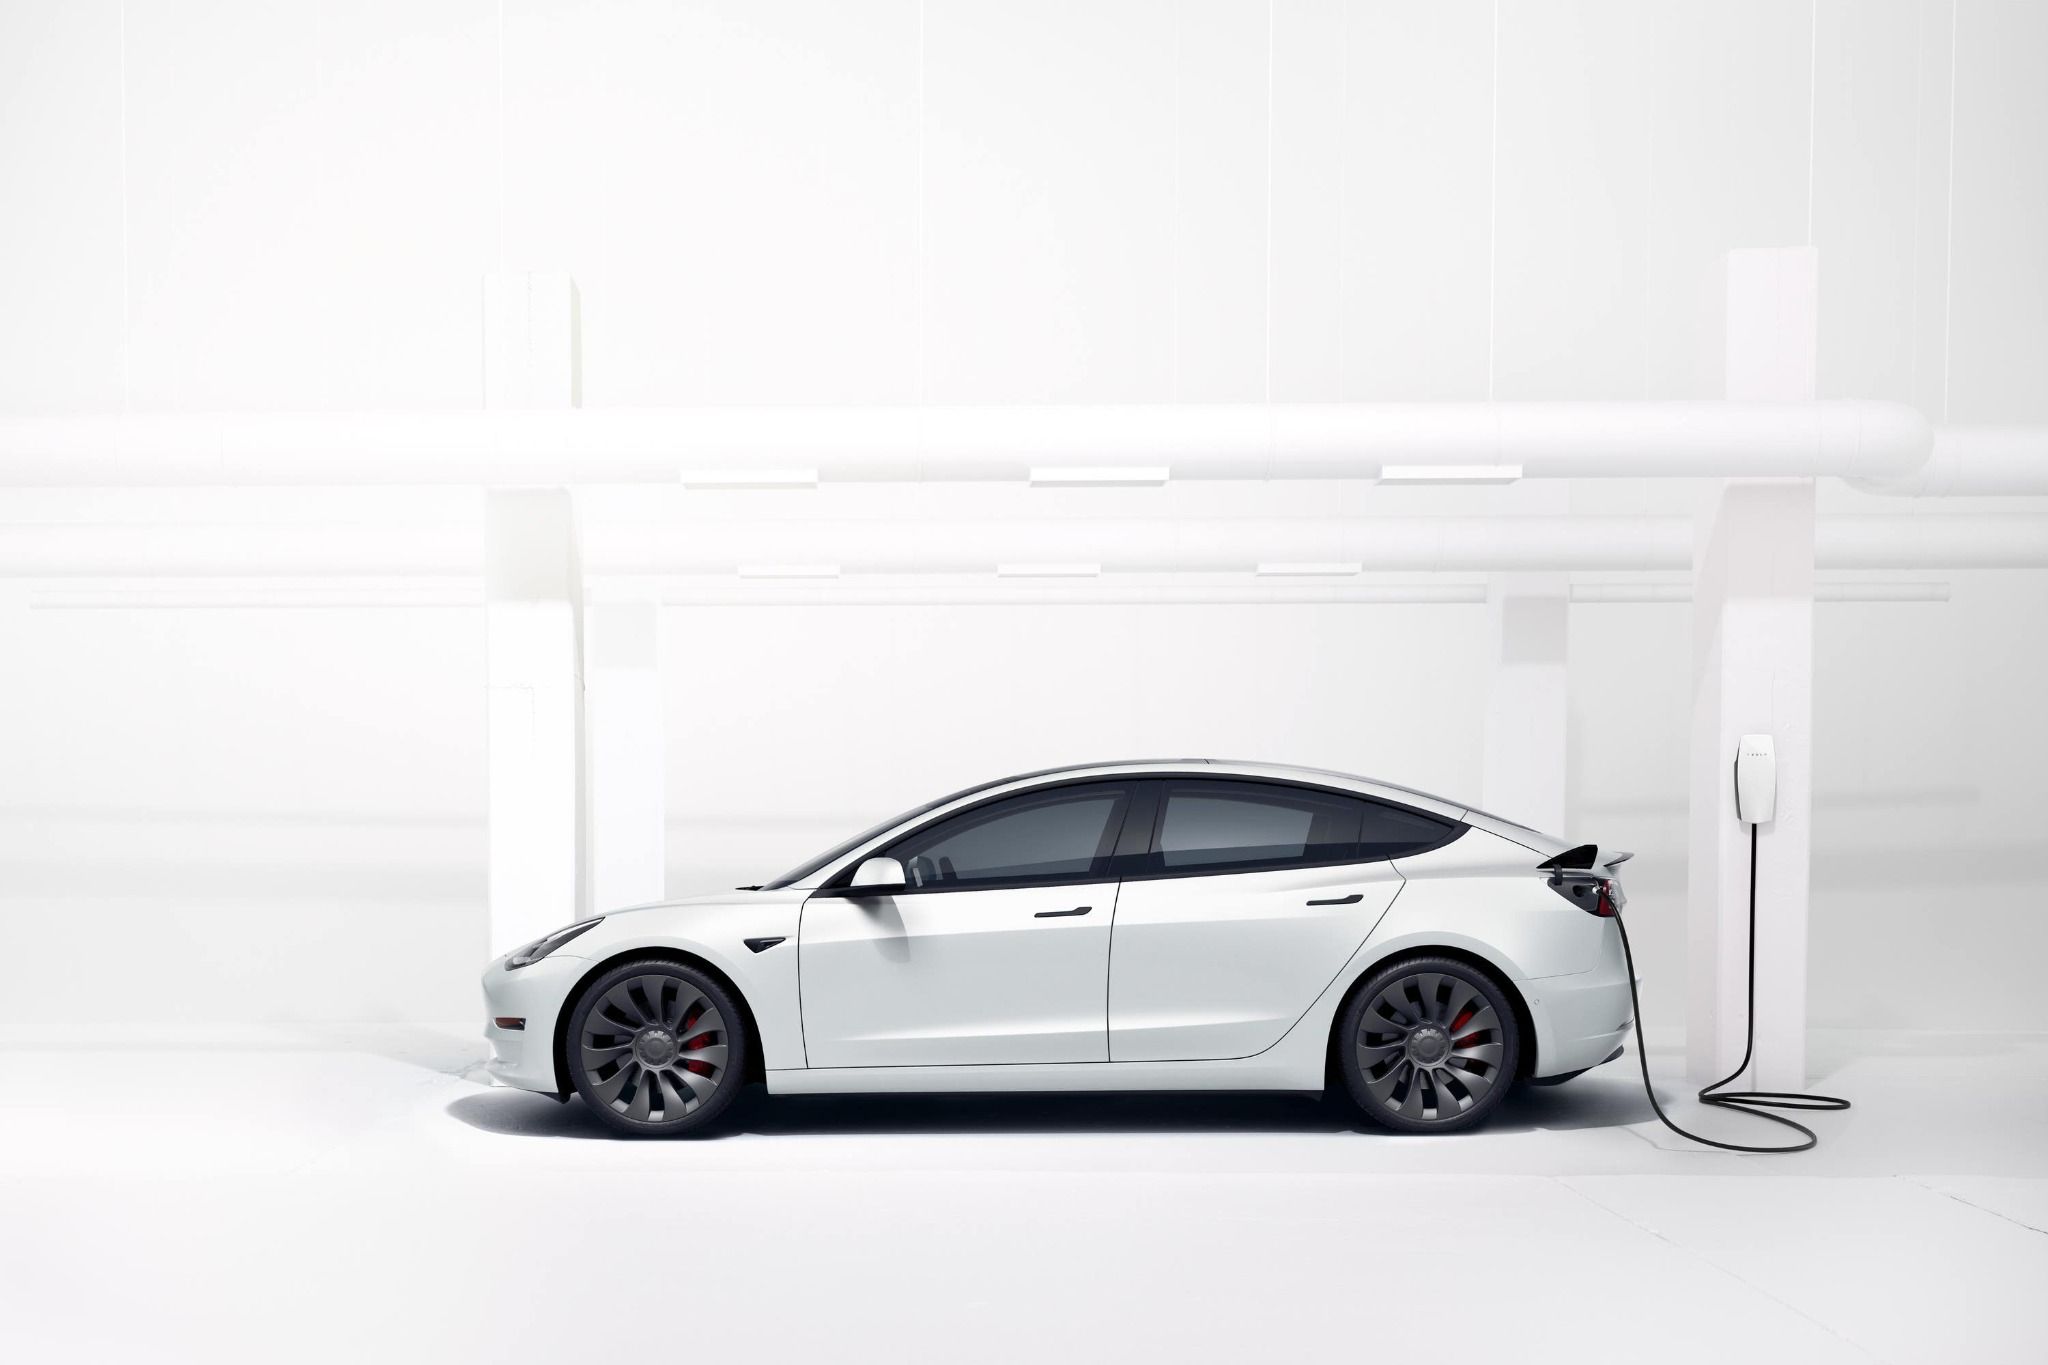 Side view of the Tesla Model 3